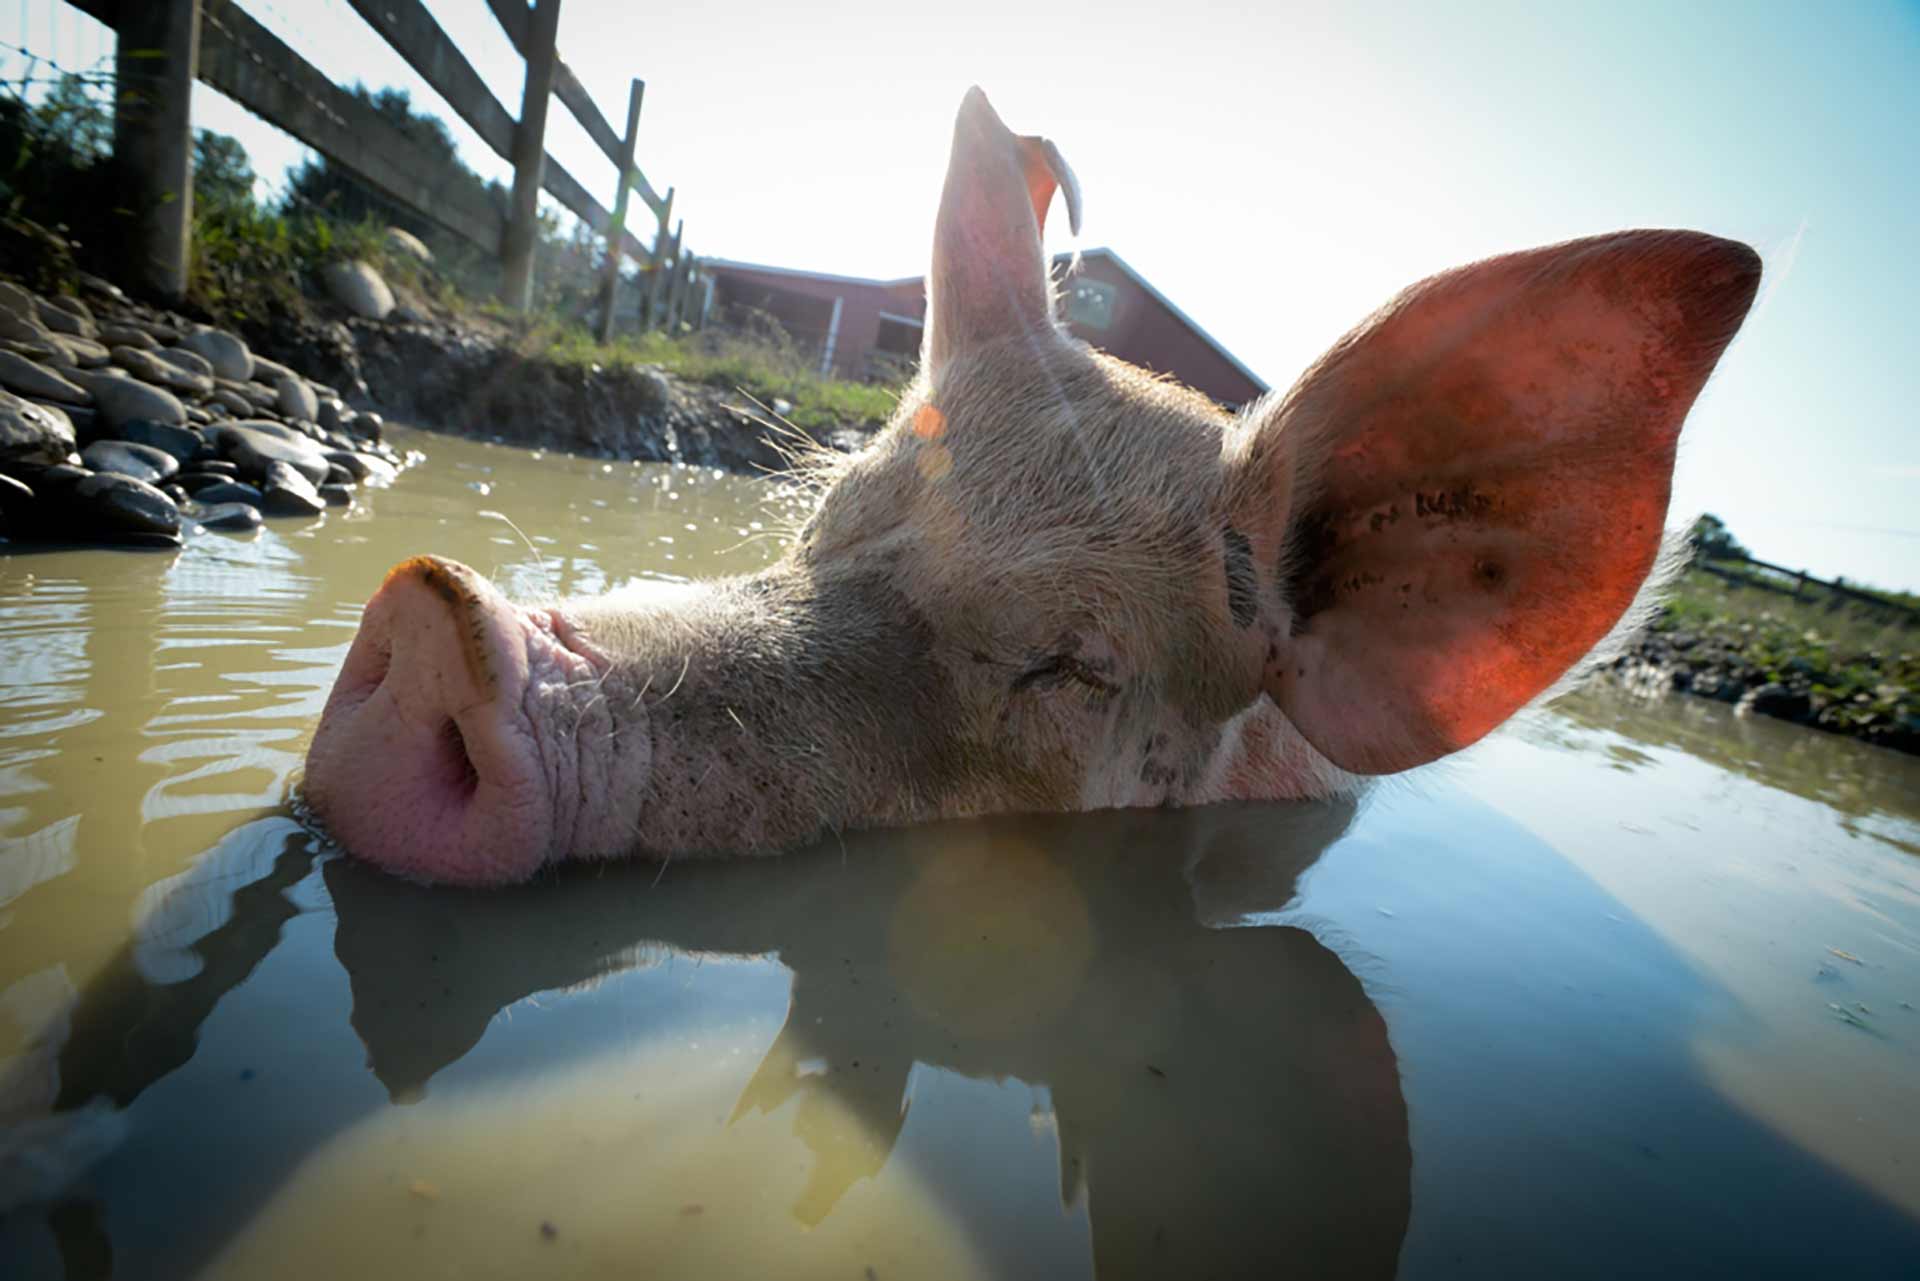 Julia the rescue pig laying in mud.